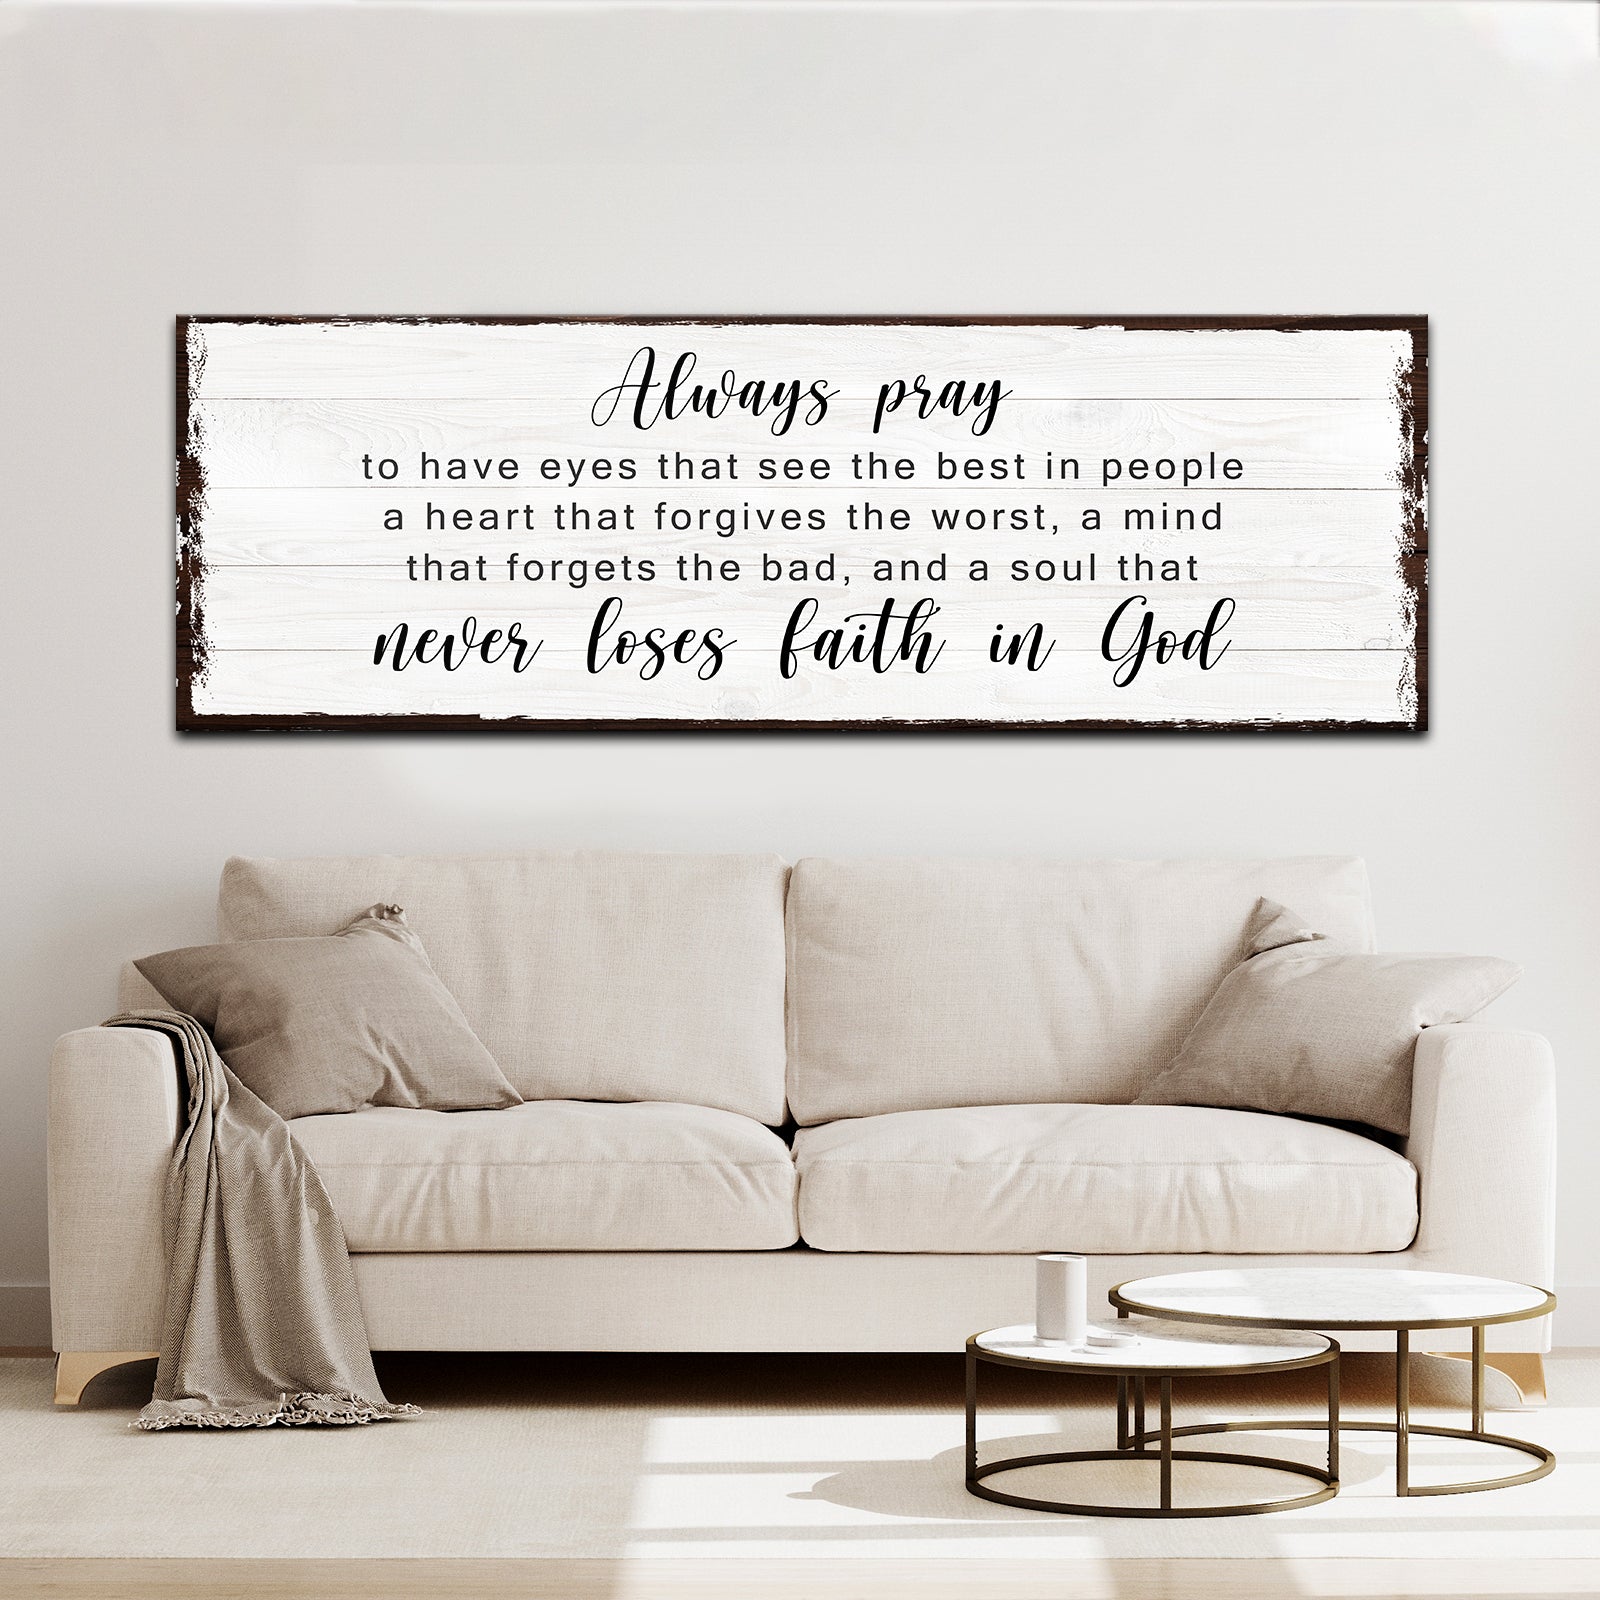 Never Lose Faith in God Sign -  Image by Tailored Canvases